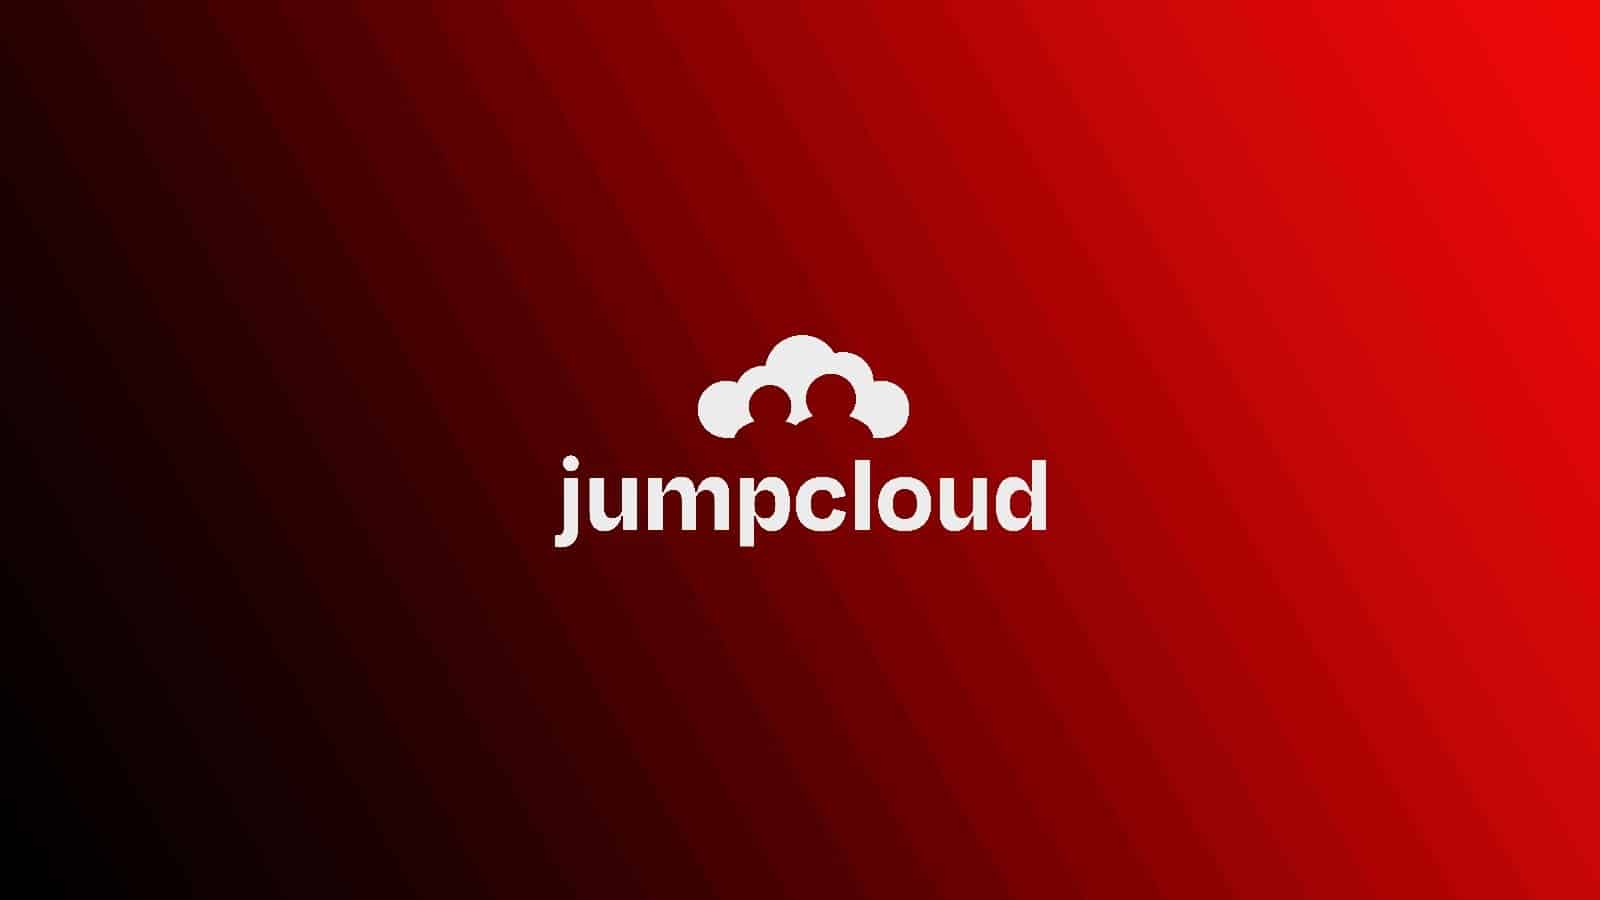 JumpCloud discloses breach by state-backed APT hacking group